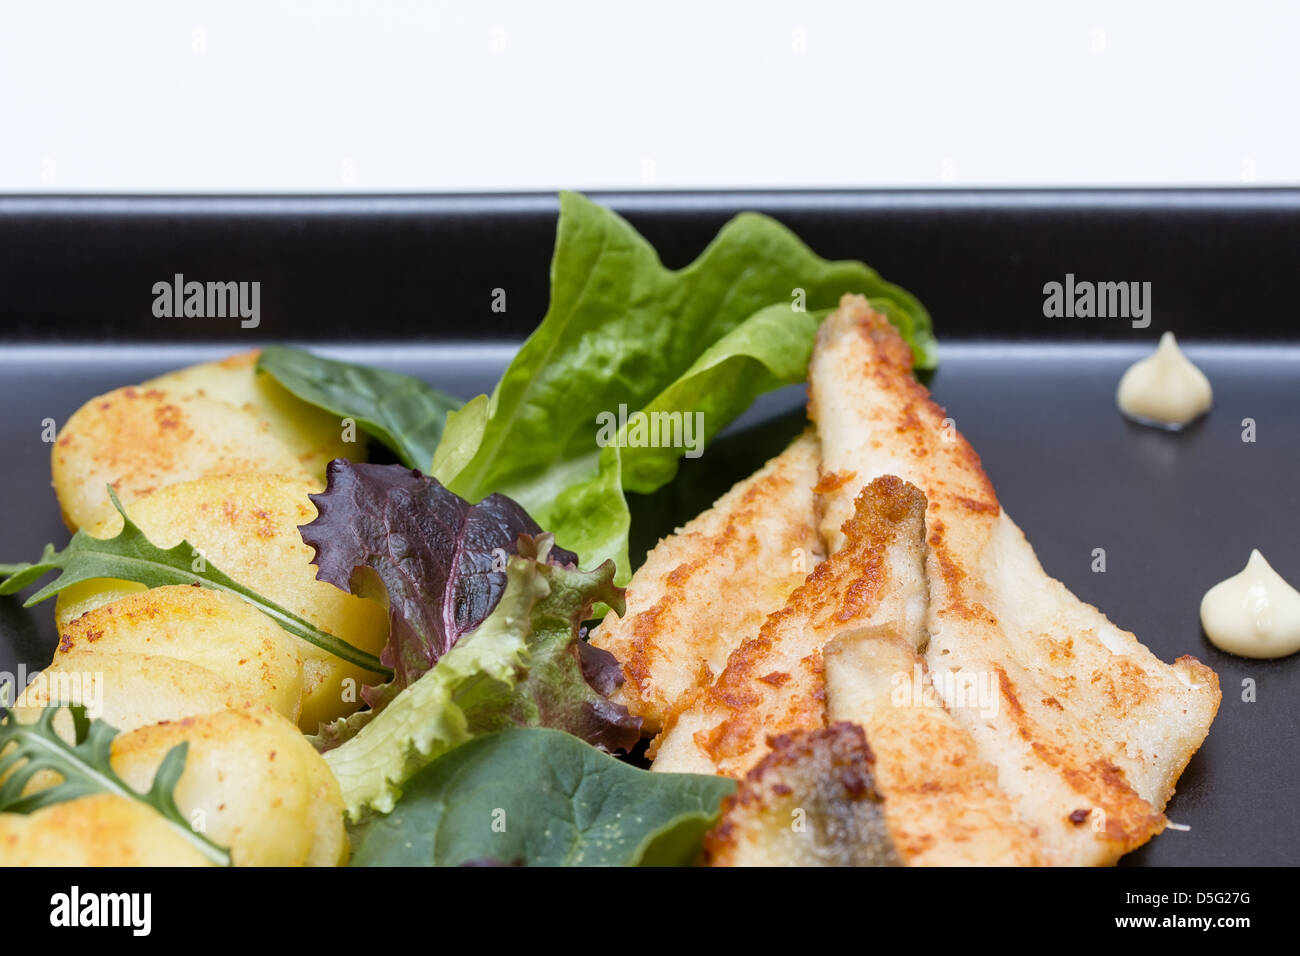 Fried perch fillets with potatoes, lemon and salad in a black plate Stock Photo